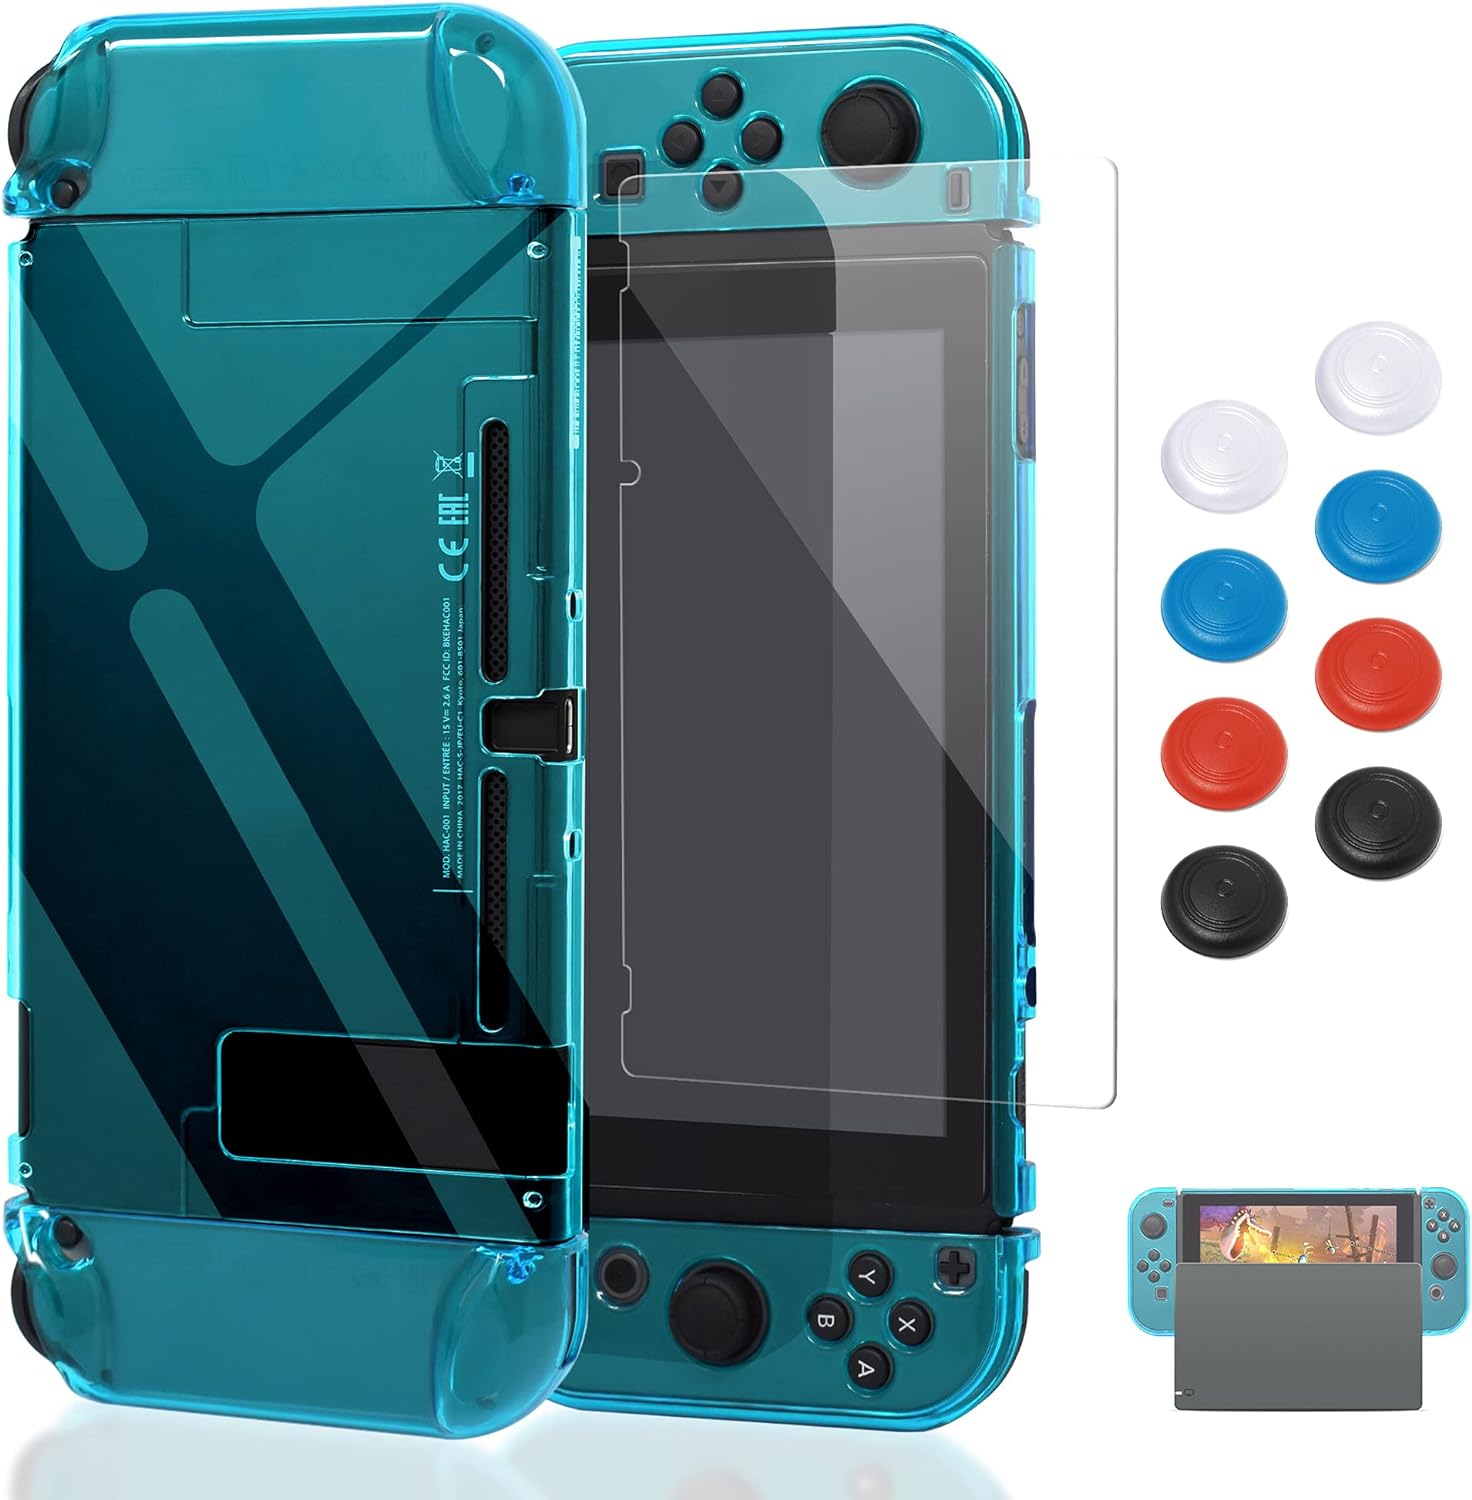 Case Compatible with Nintendo Switch, Fit The Dock Station, Protective Accessories Cover Compatible with Joy Con Controller and Console Dockable with a Tempered Glass Screen Protector,Blue